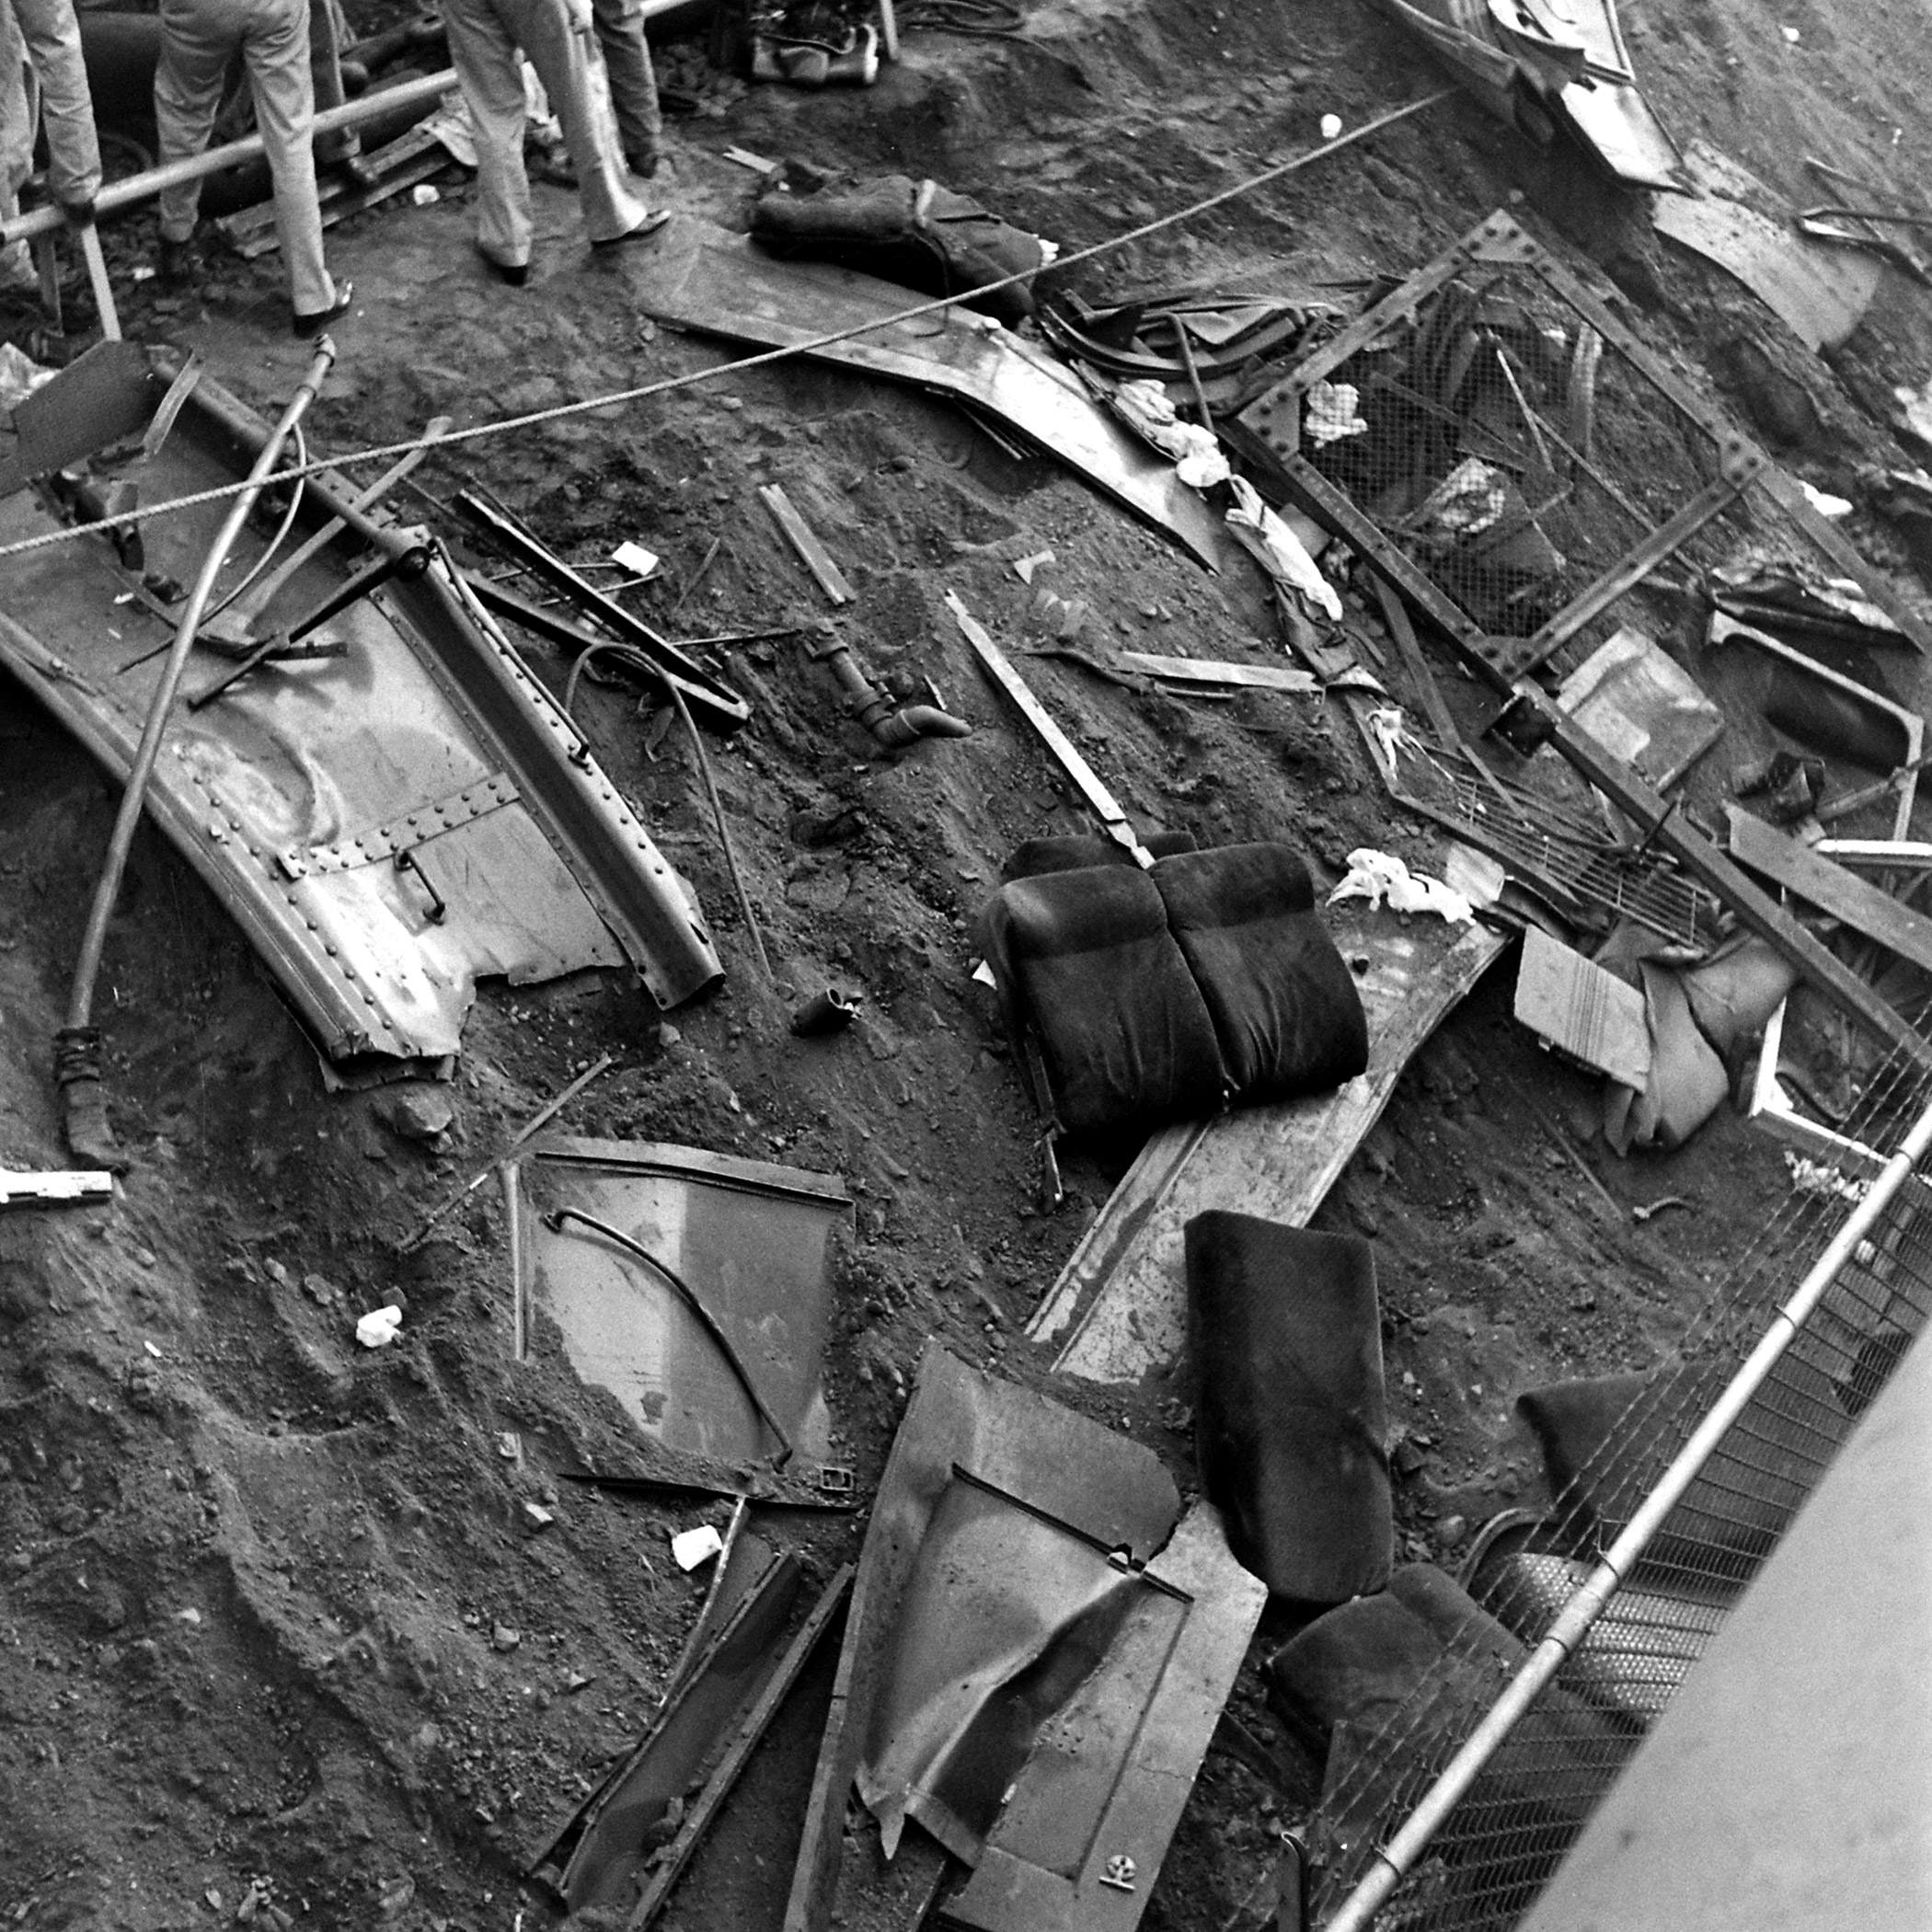 Scene from the 1943 Congressional Limited train wreck in Philadelphia.